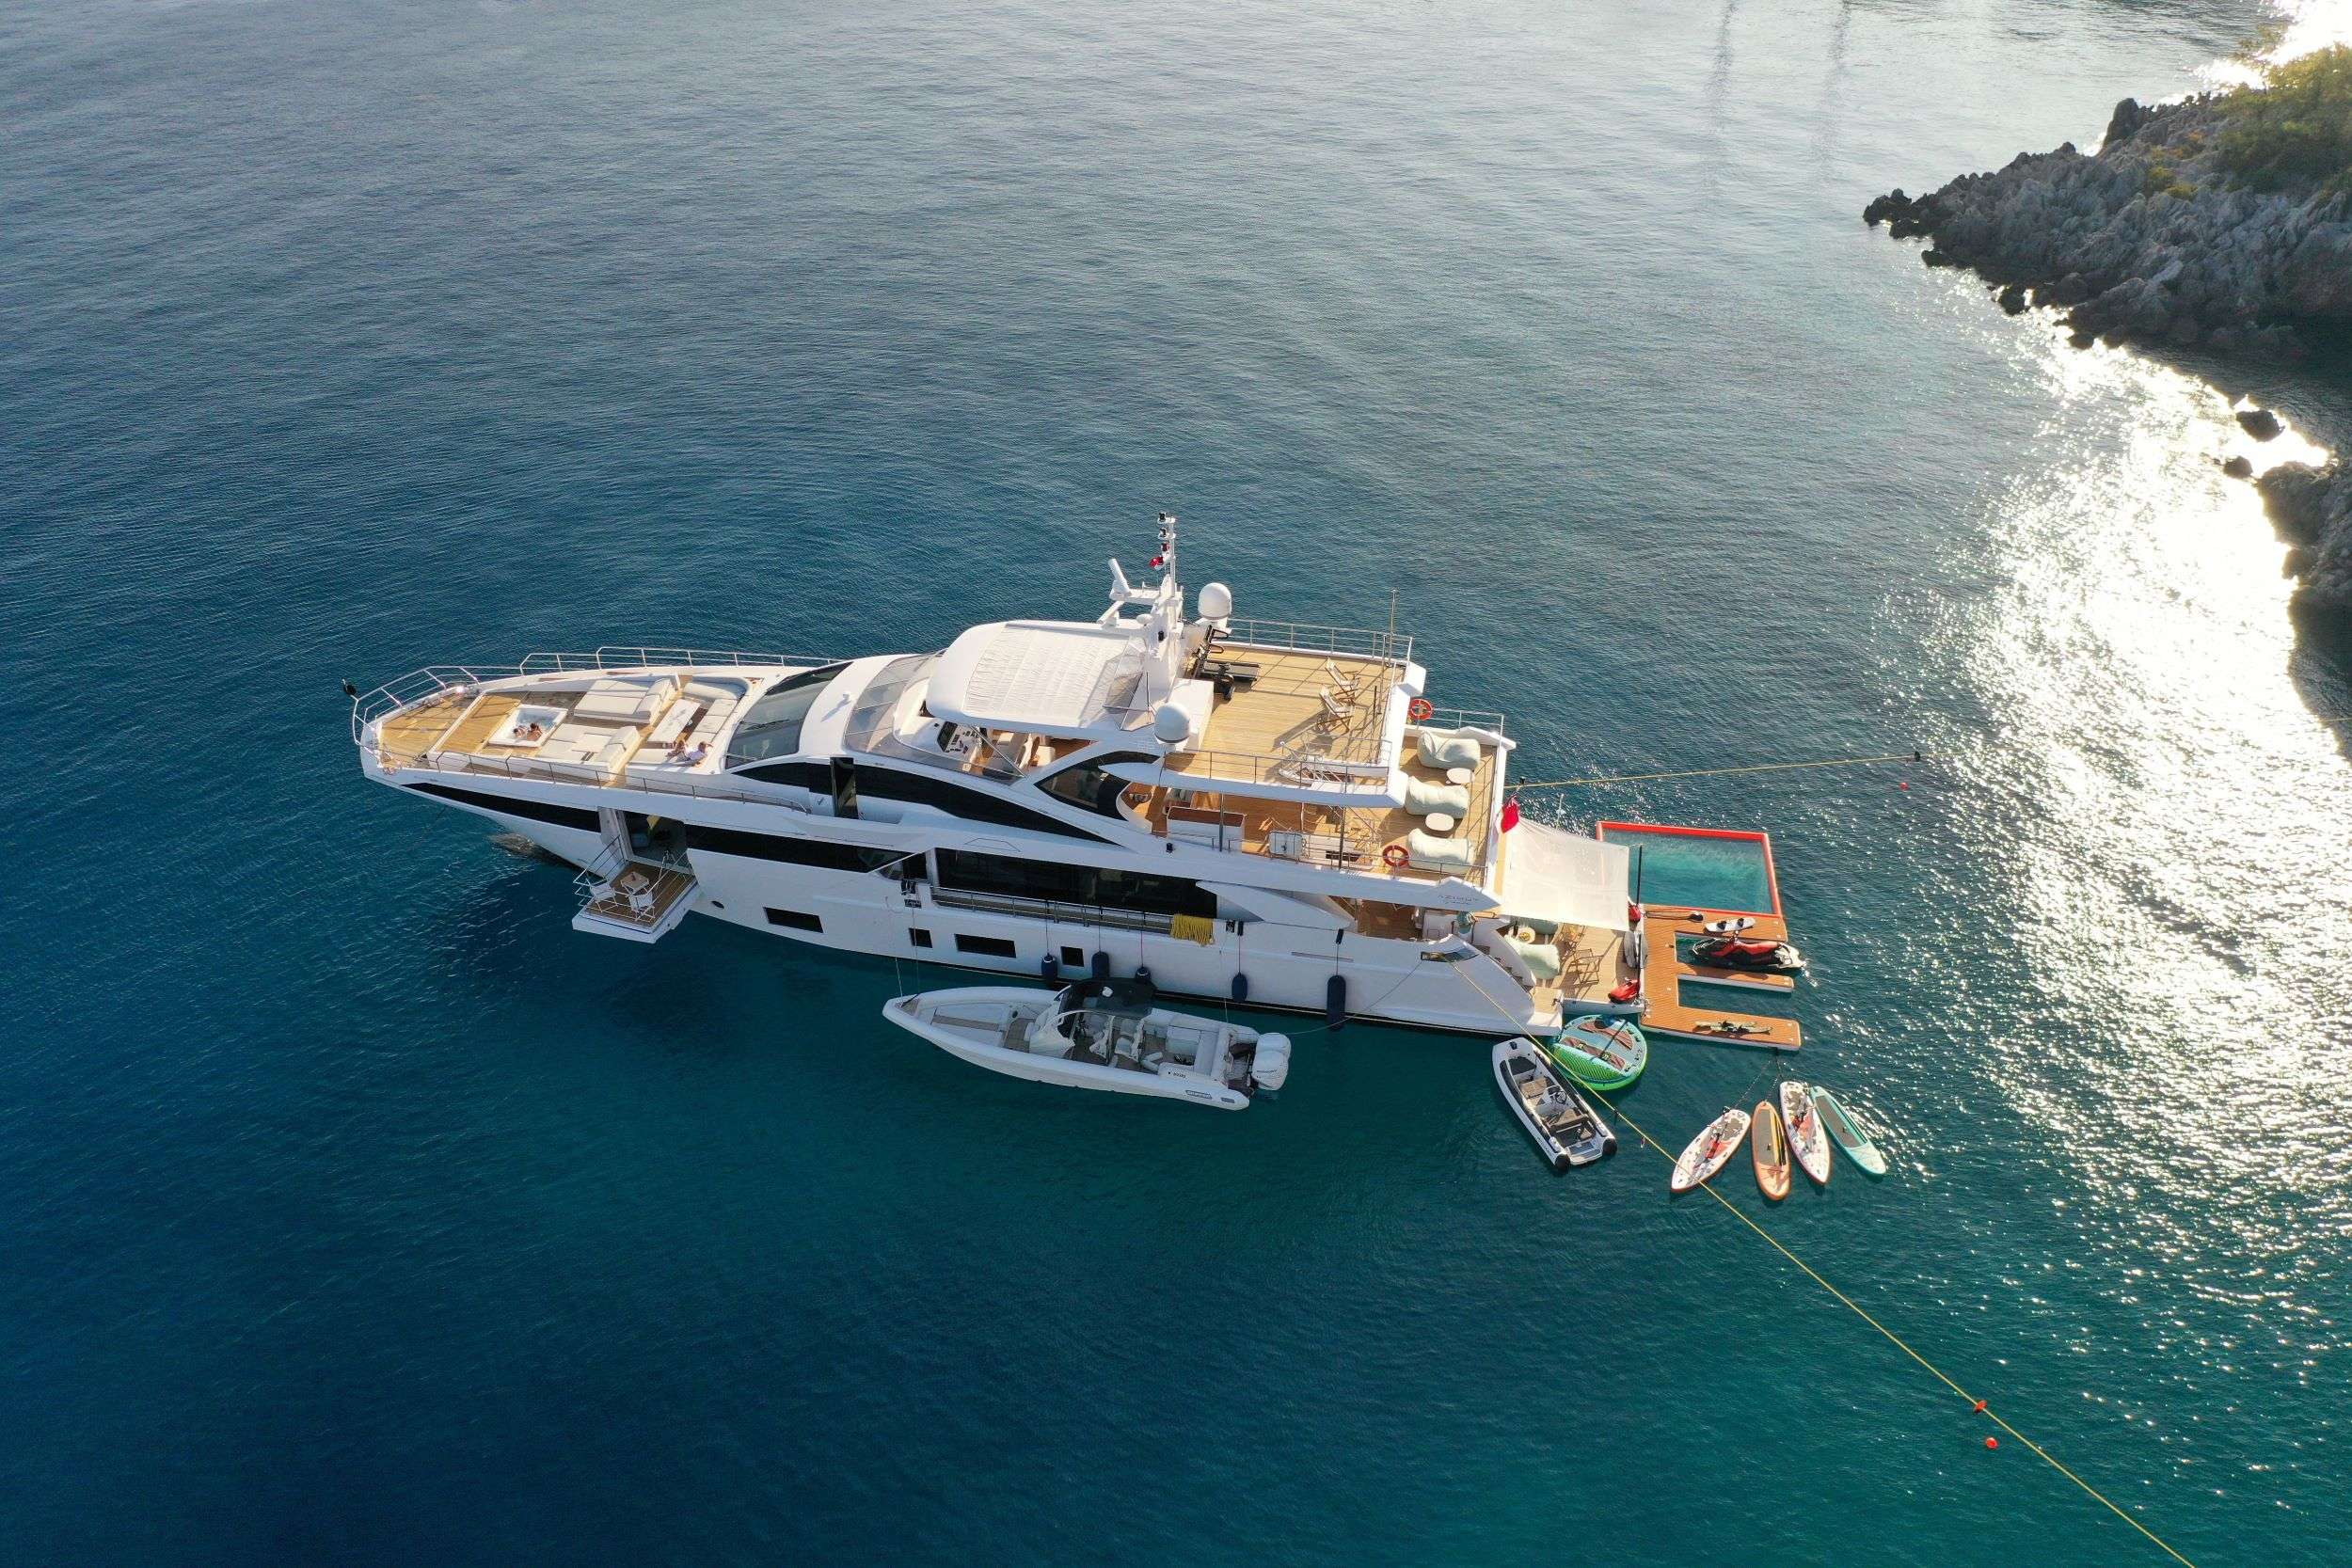 LOVE T - Yacht Charter Milazzo & Boat hire in Summer: Greece | Winter: W. Med -Naples/Sicily 1